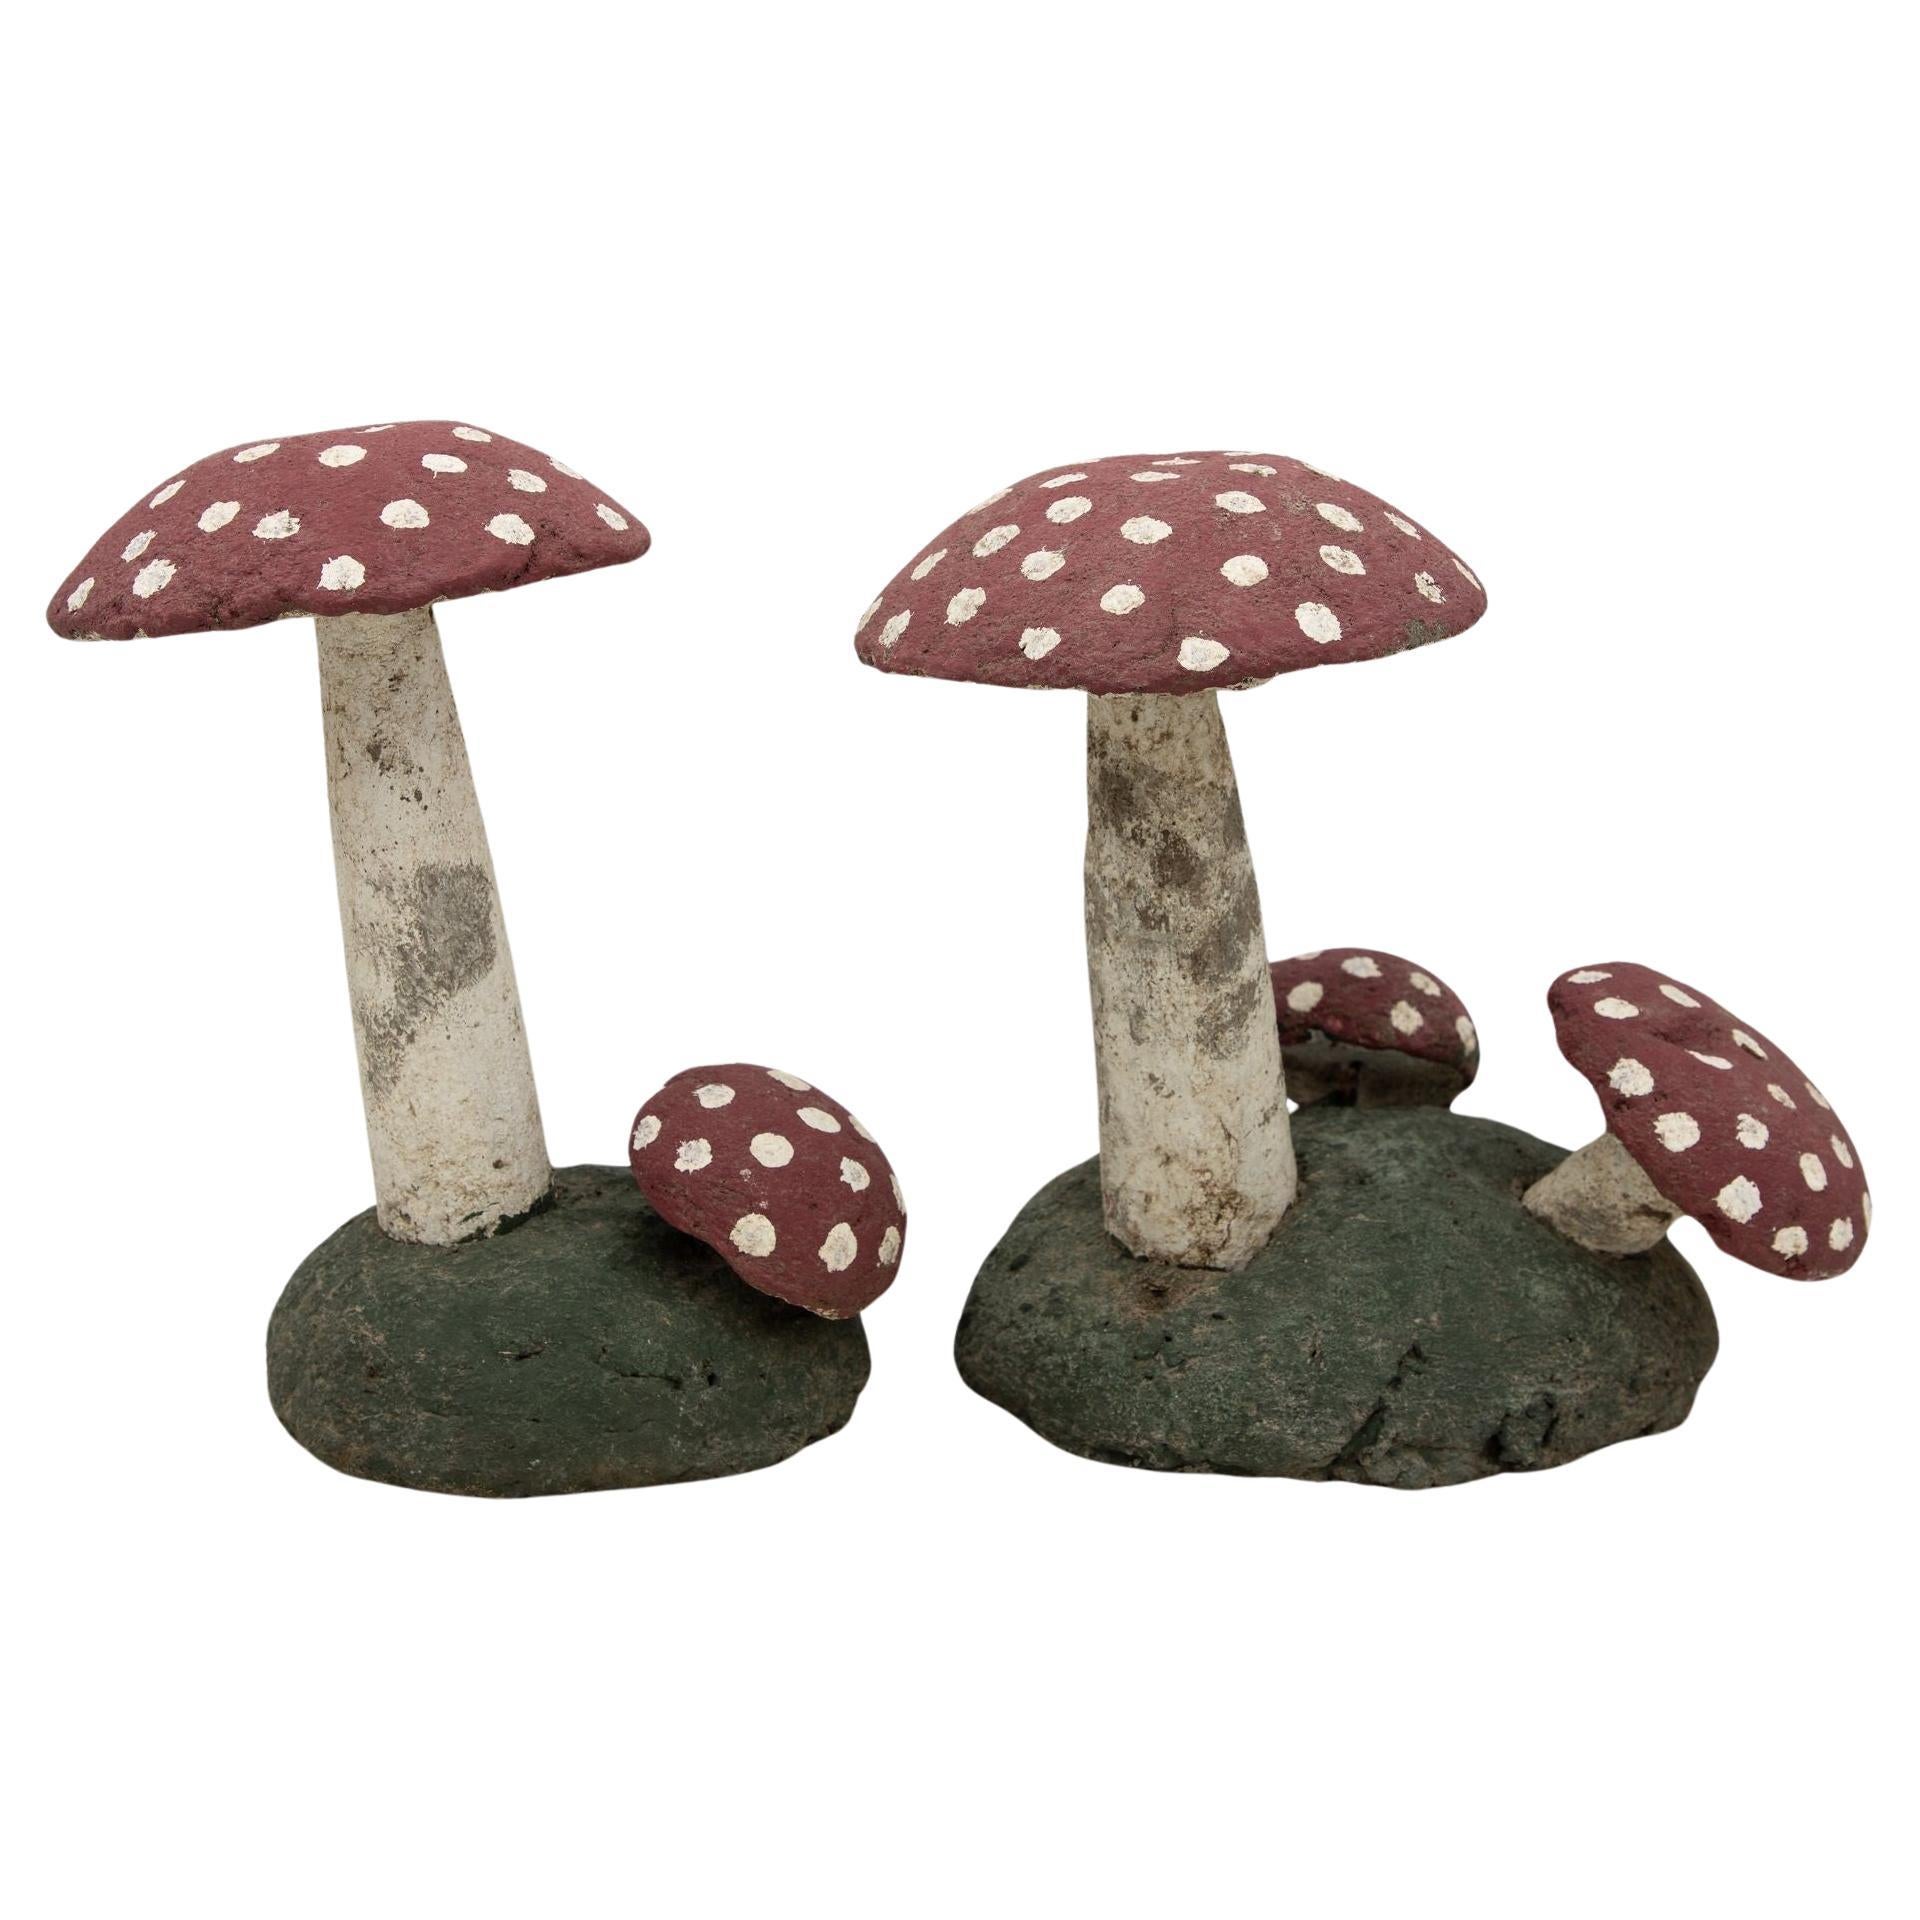 Pair Vintage Painted Stone Toadstools Mushrooms with Red Caps For Sale